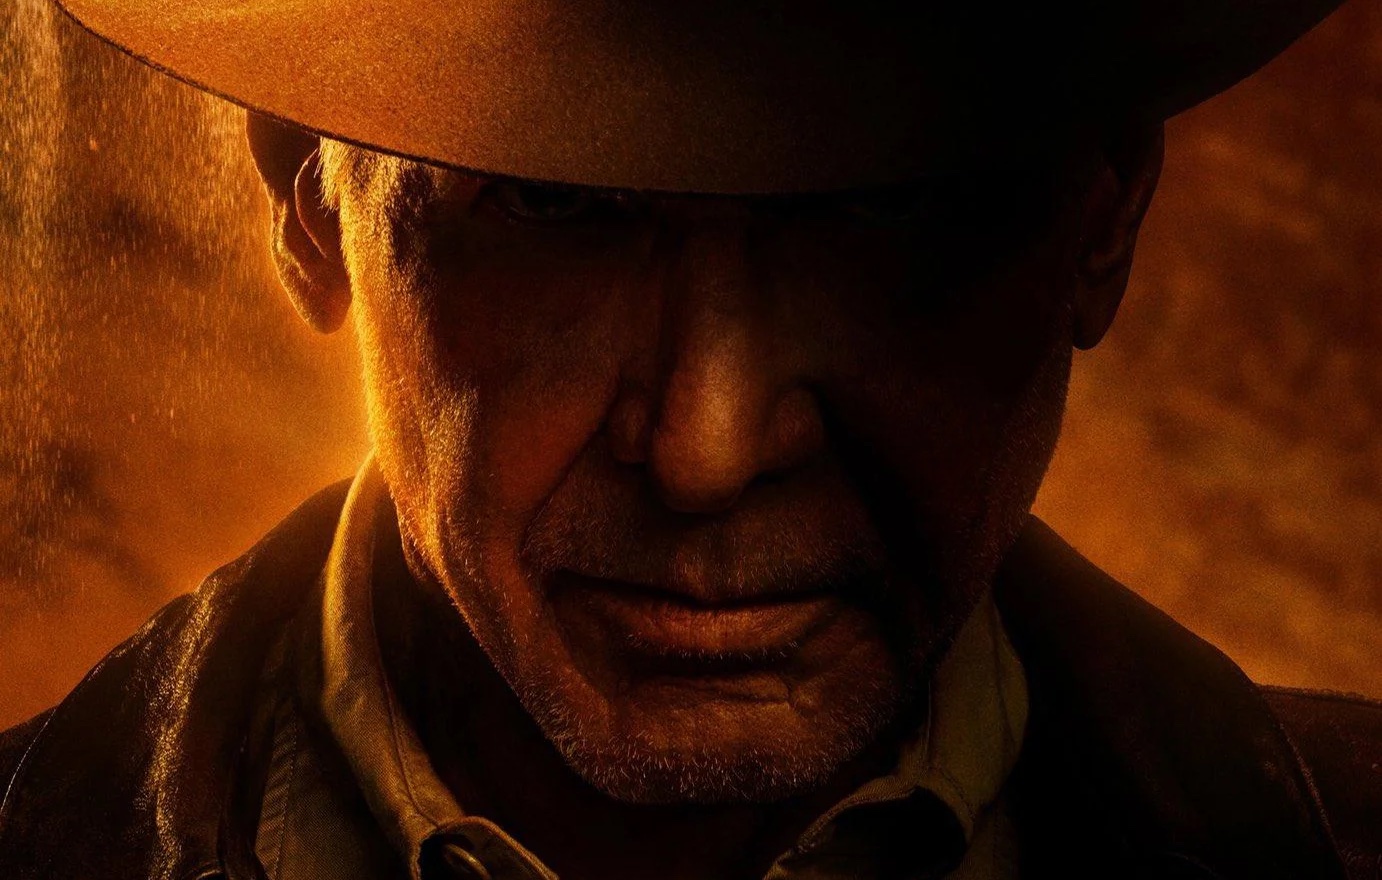 Watch: Indiana Jones is Back! Trailer for Dial of Destiny Released!